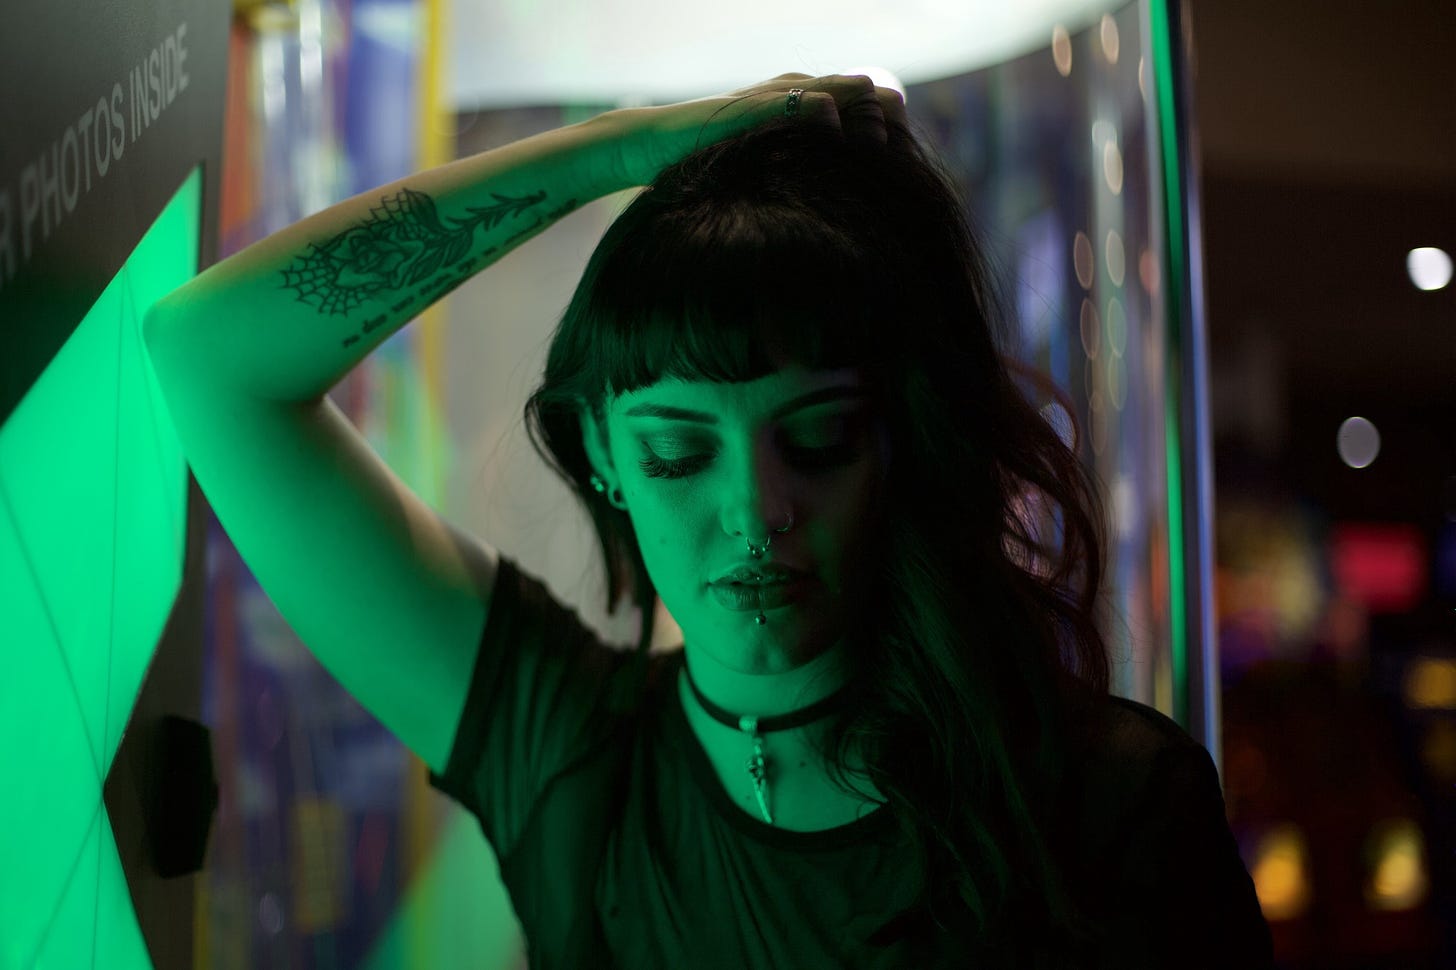 A young woman with dark hair and tattoos is standing in an arcade and painted green with light.